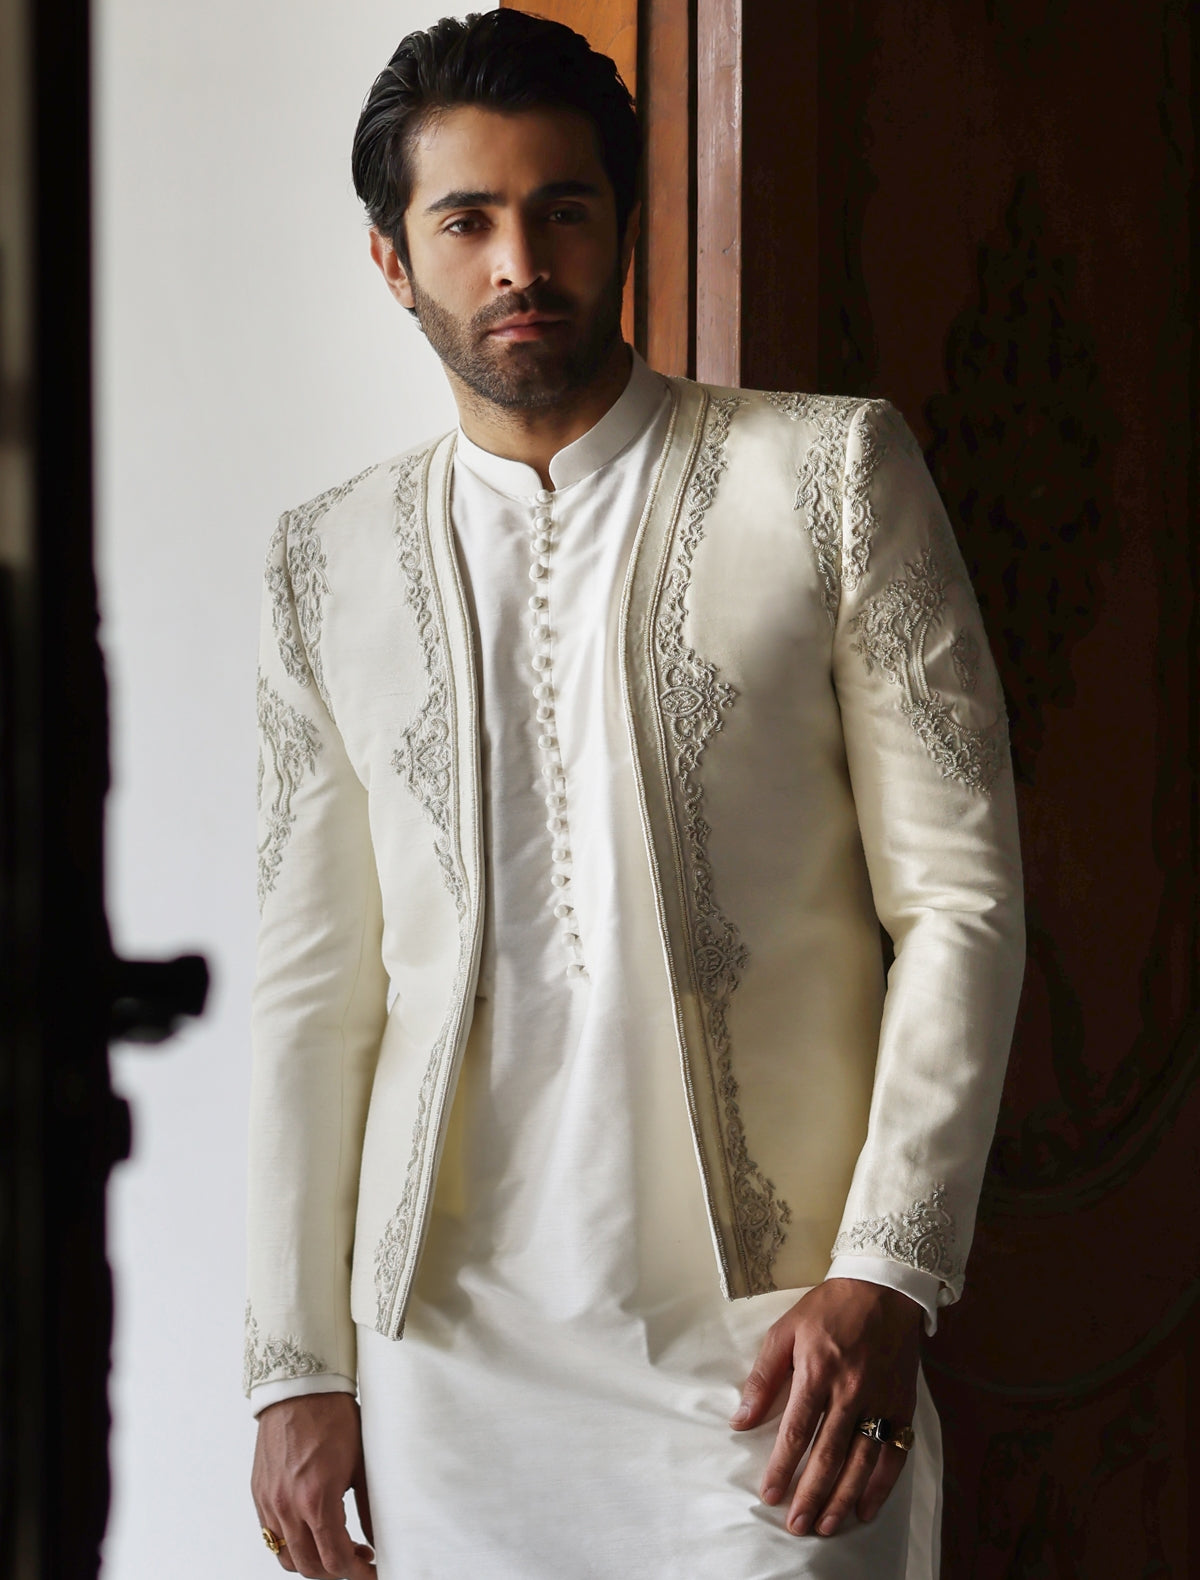 OFF-WHITE HAND EMBROIDERED PRINCE COAT-S – Ismail Farid Pakistan